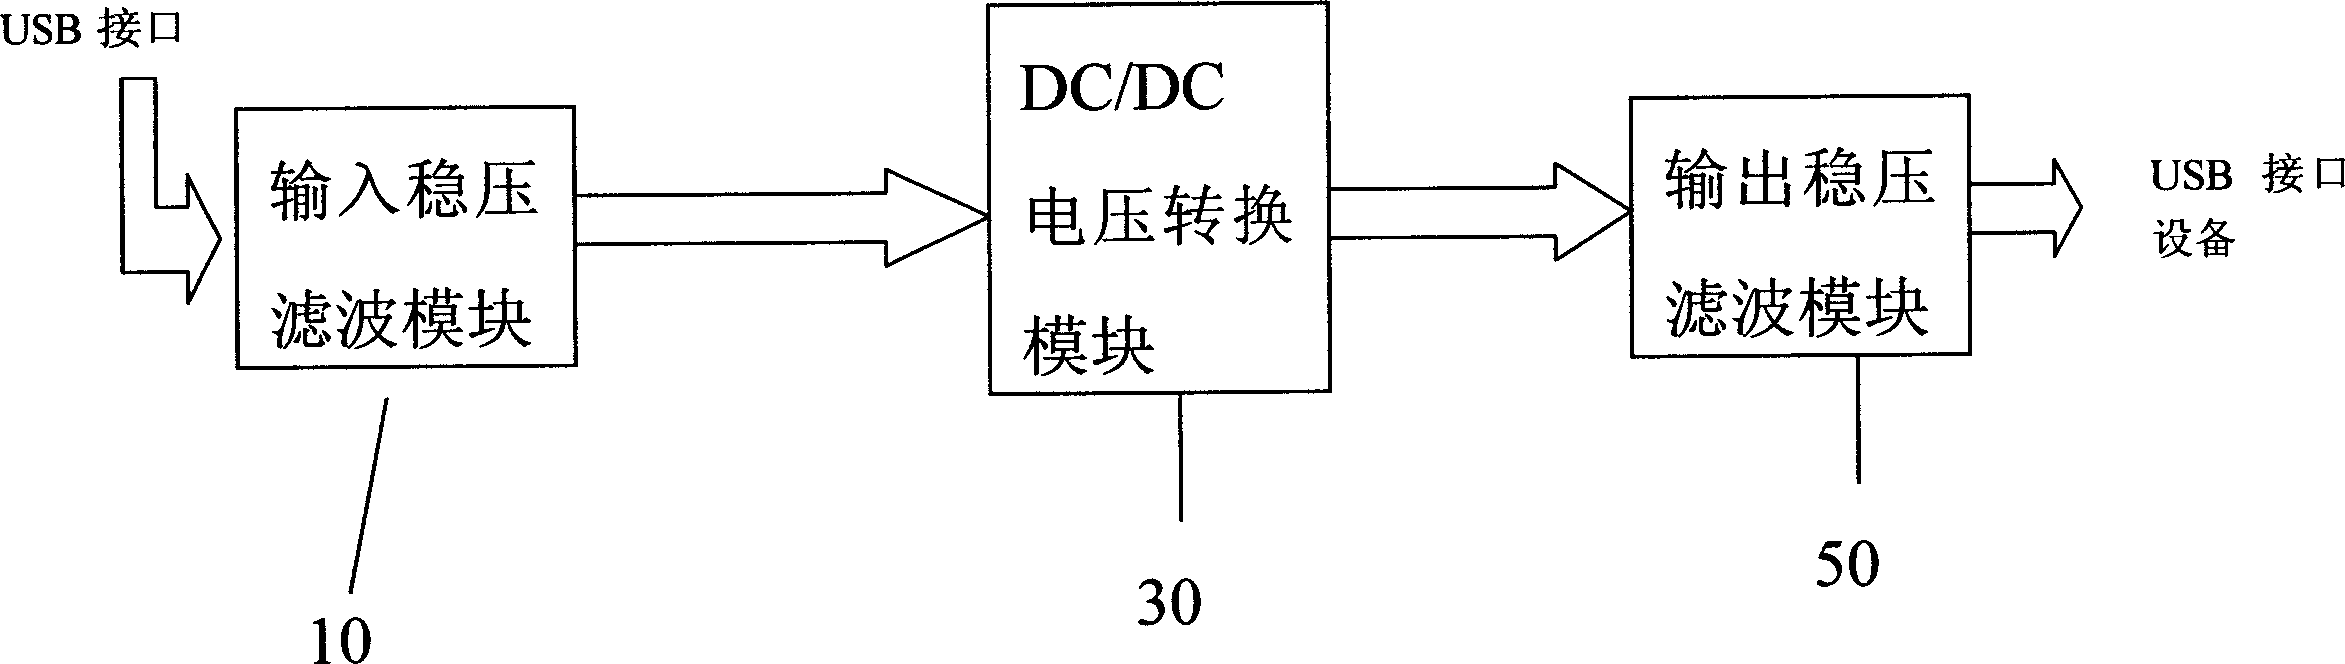 Power supply management method and device